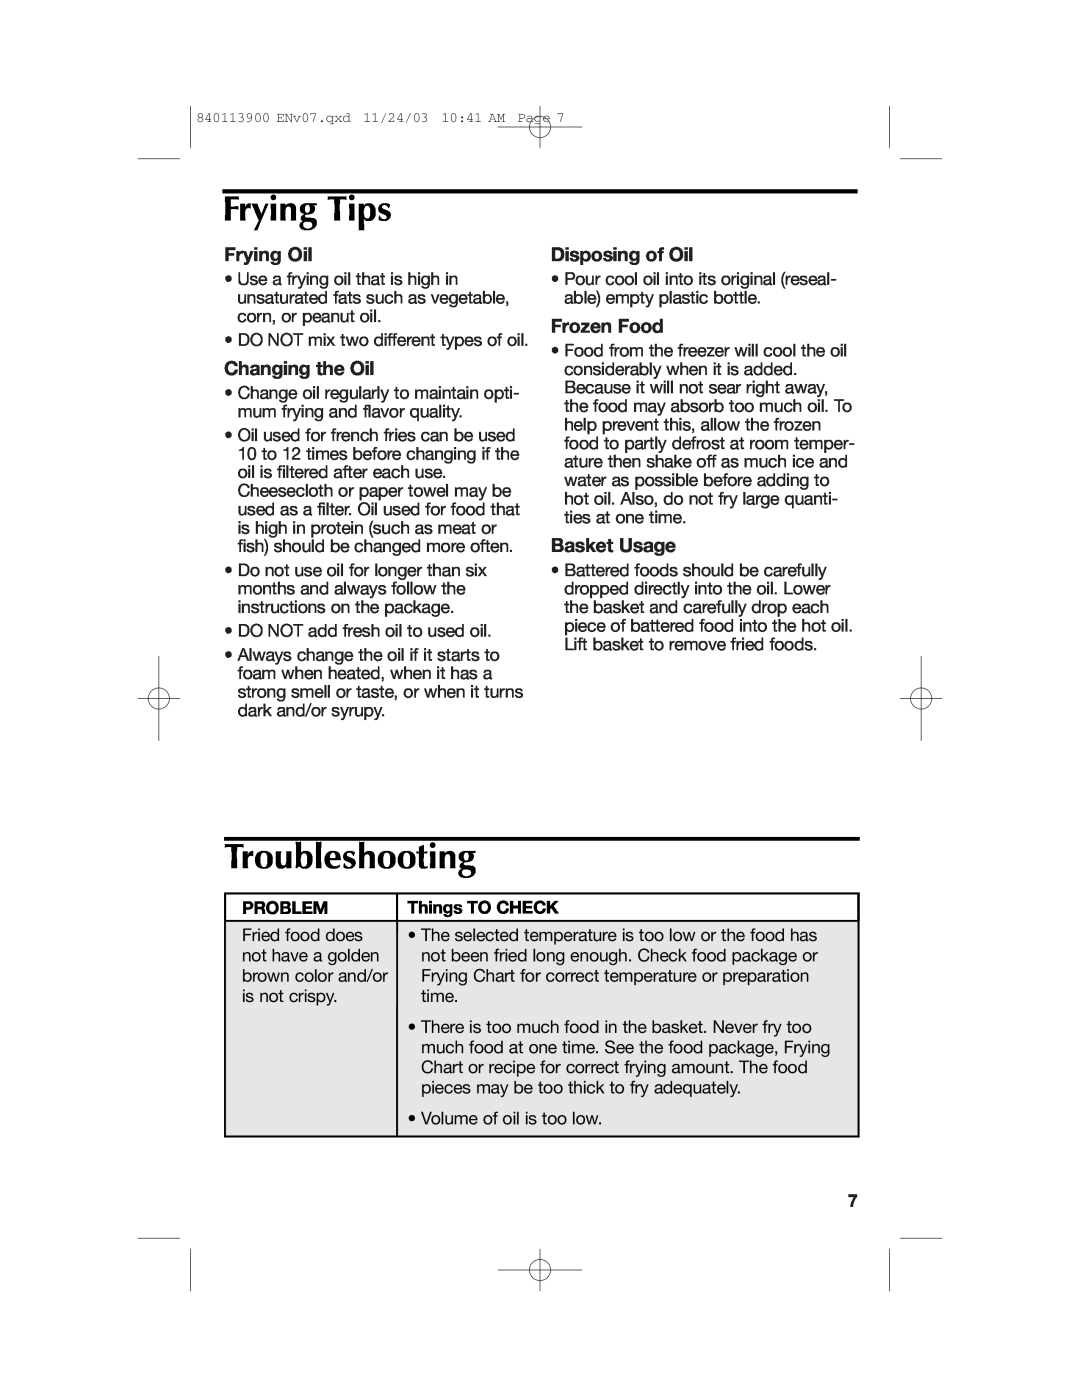 Hamilton Beach 35015 manual Frying Tips, Troubleshooting, Frying Oil, Changing the Oil, Disposing of Oil, Frozen Food 